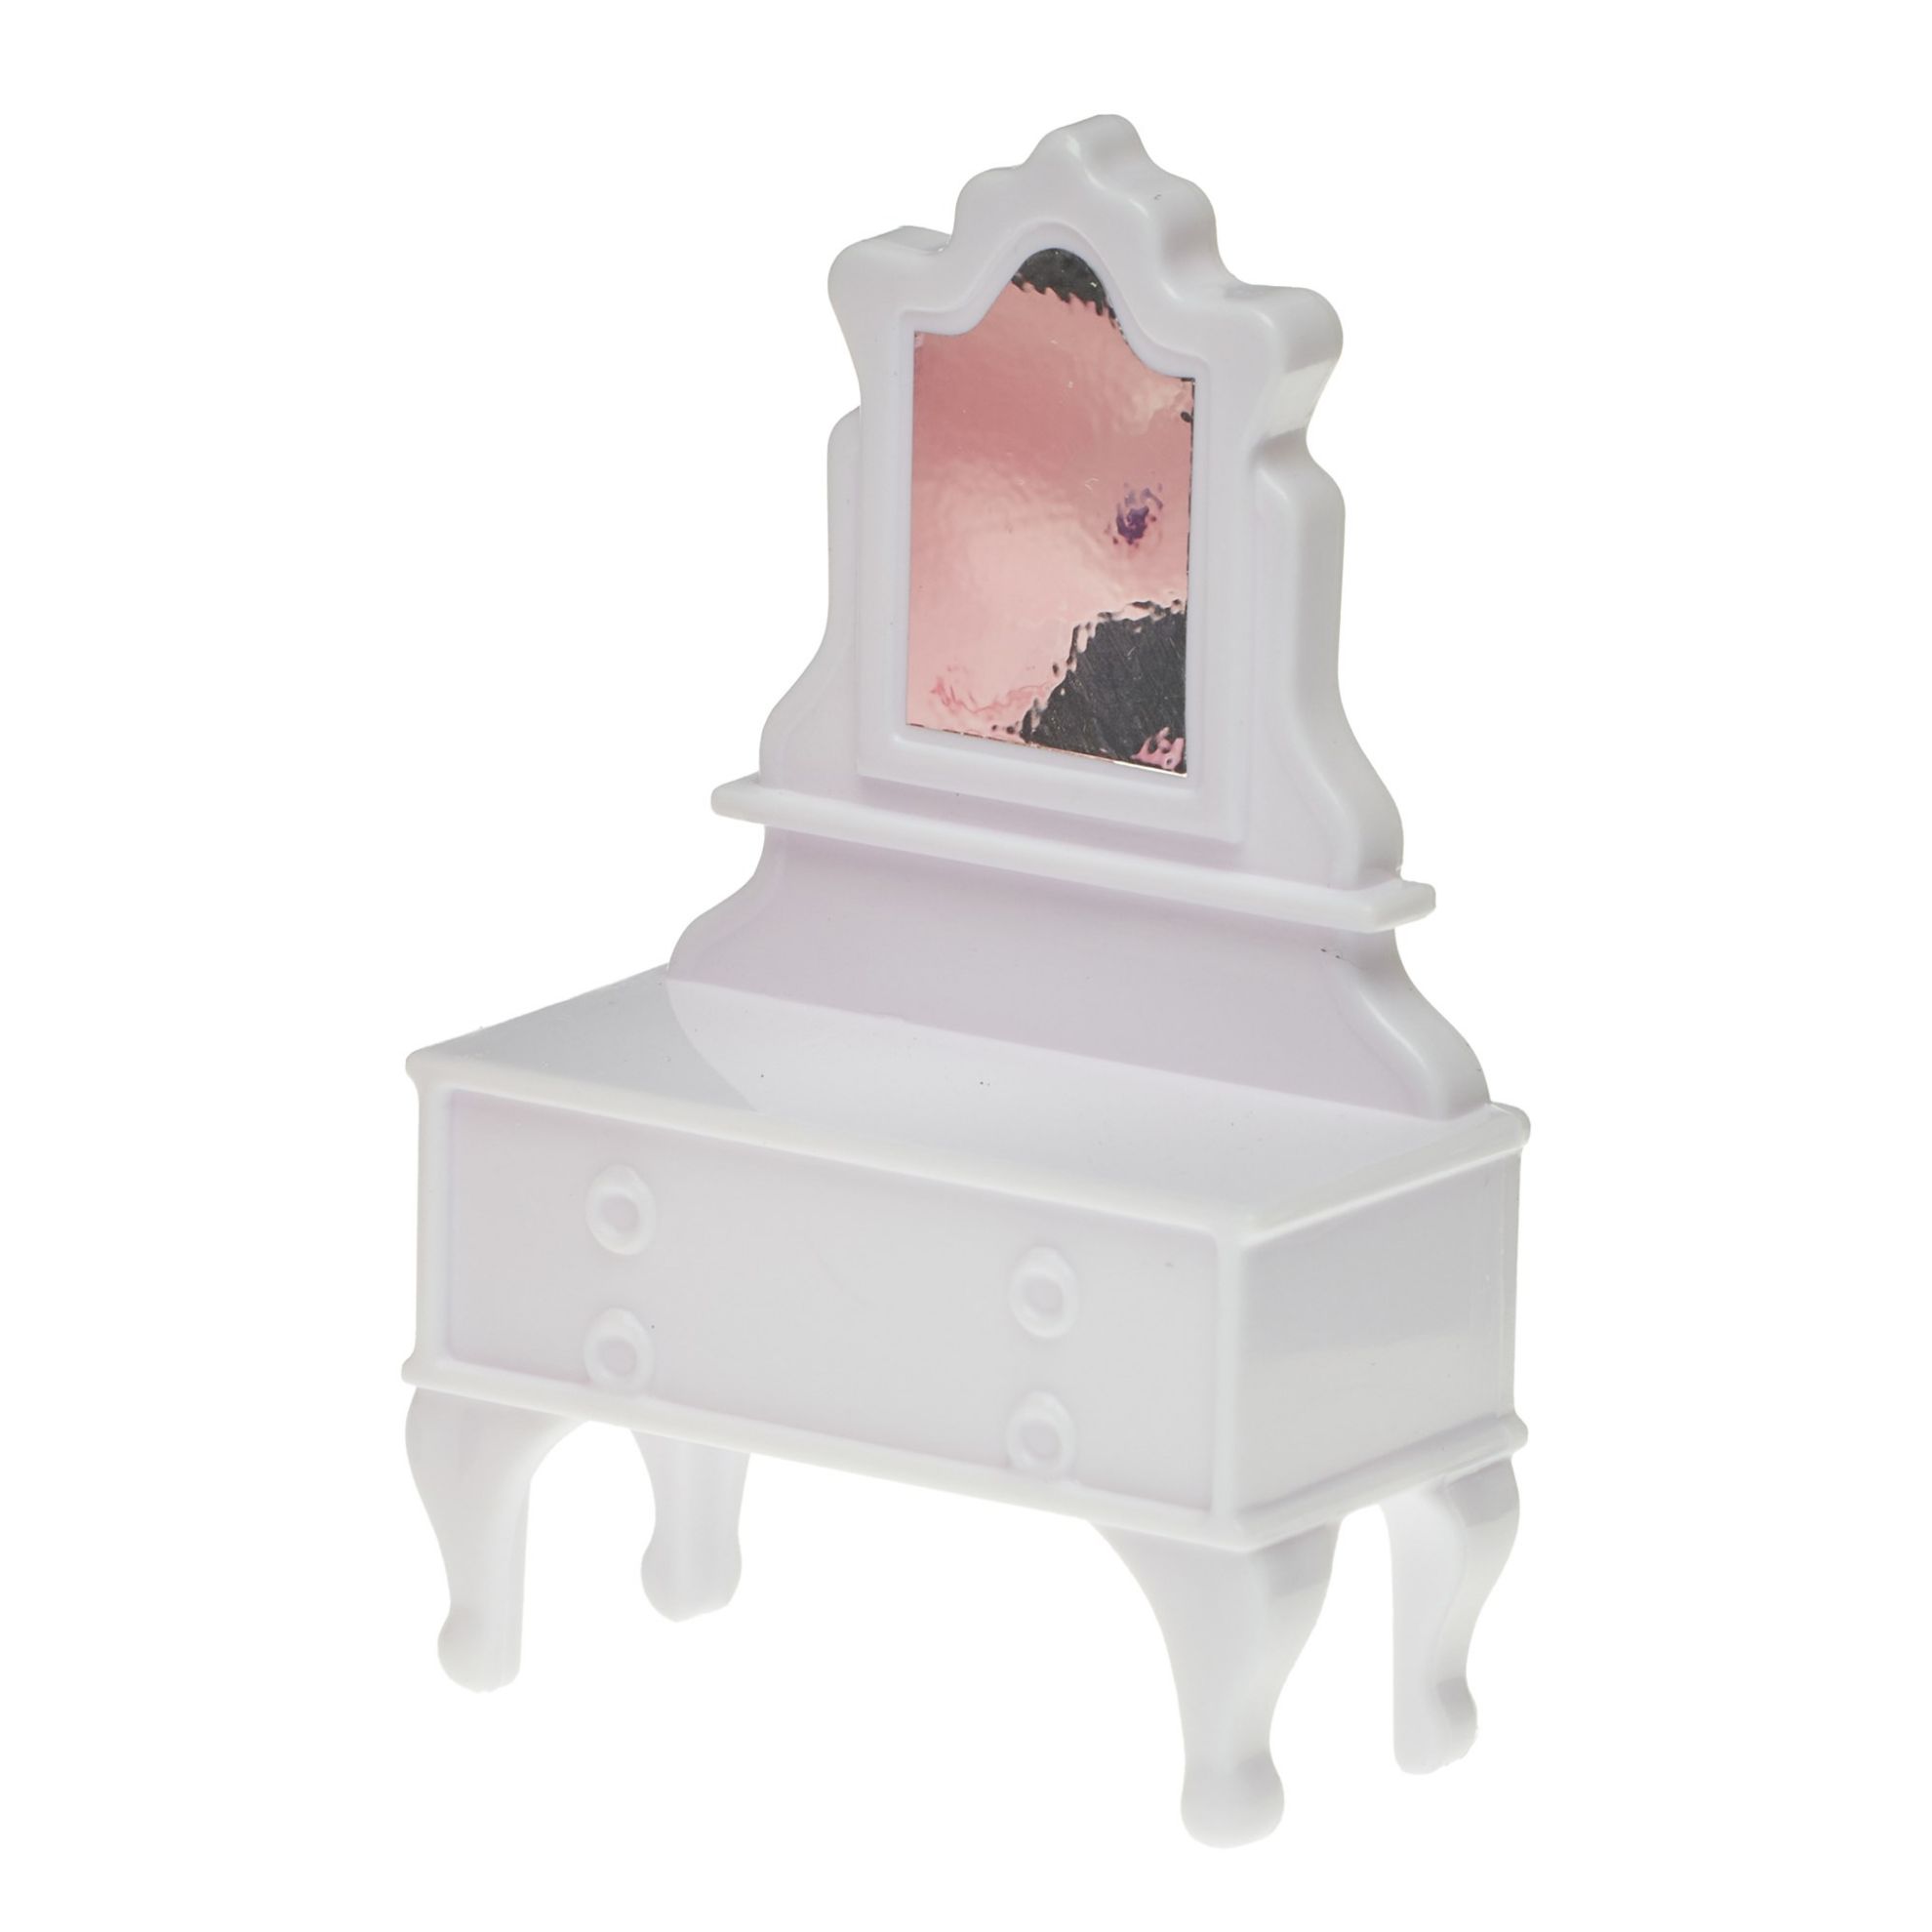 Spare Parts - Peppa Pig Wooden Playhouse - White Dressing Table